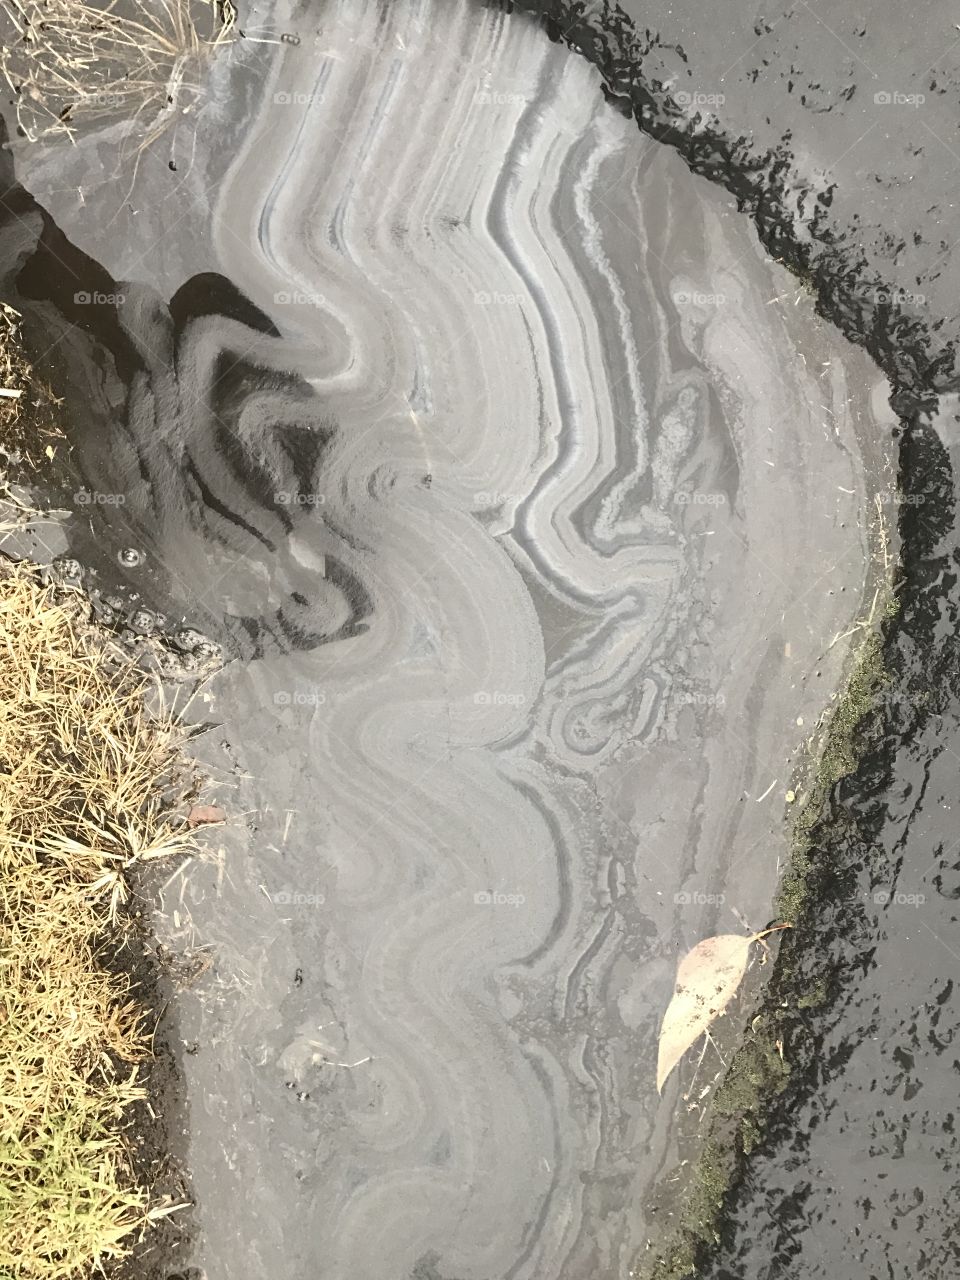 How oil and water do not mix but make great artistic designs.